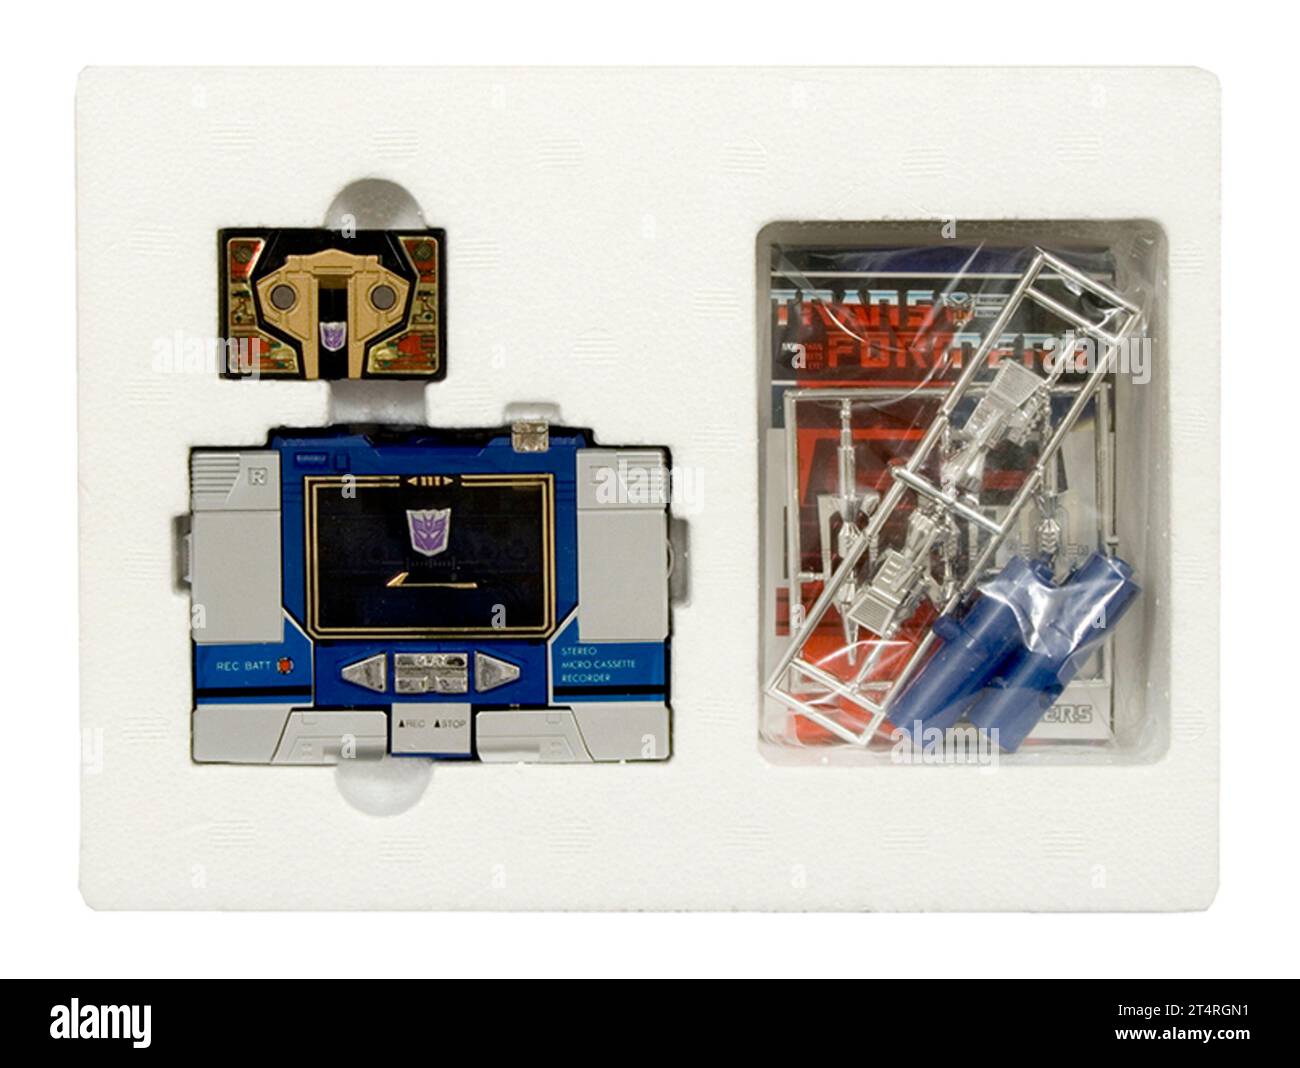 1984 Boxed Hasbro Transformers Generation 1 Soundwave with Buzzsaw Stock Photo